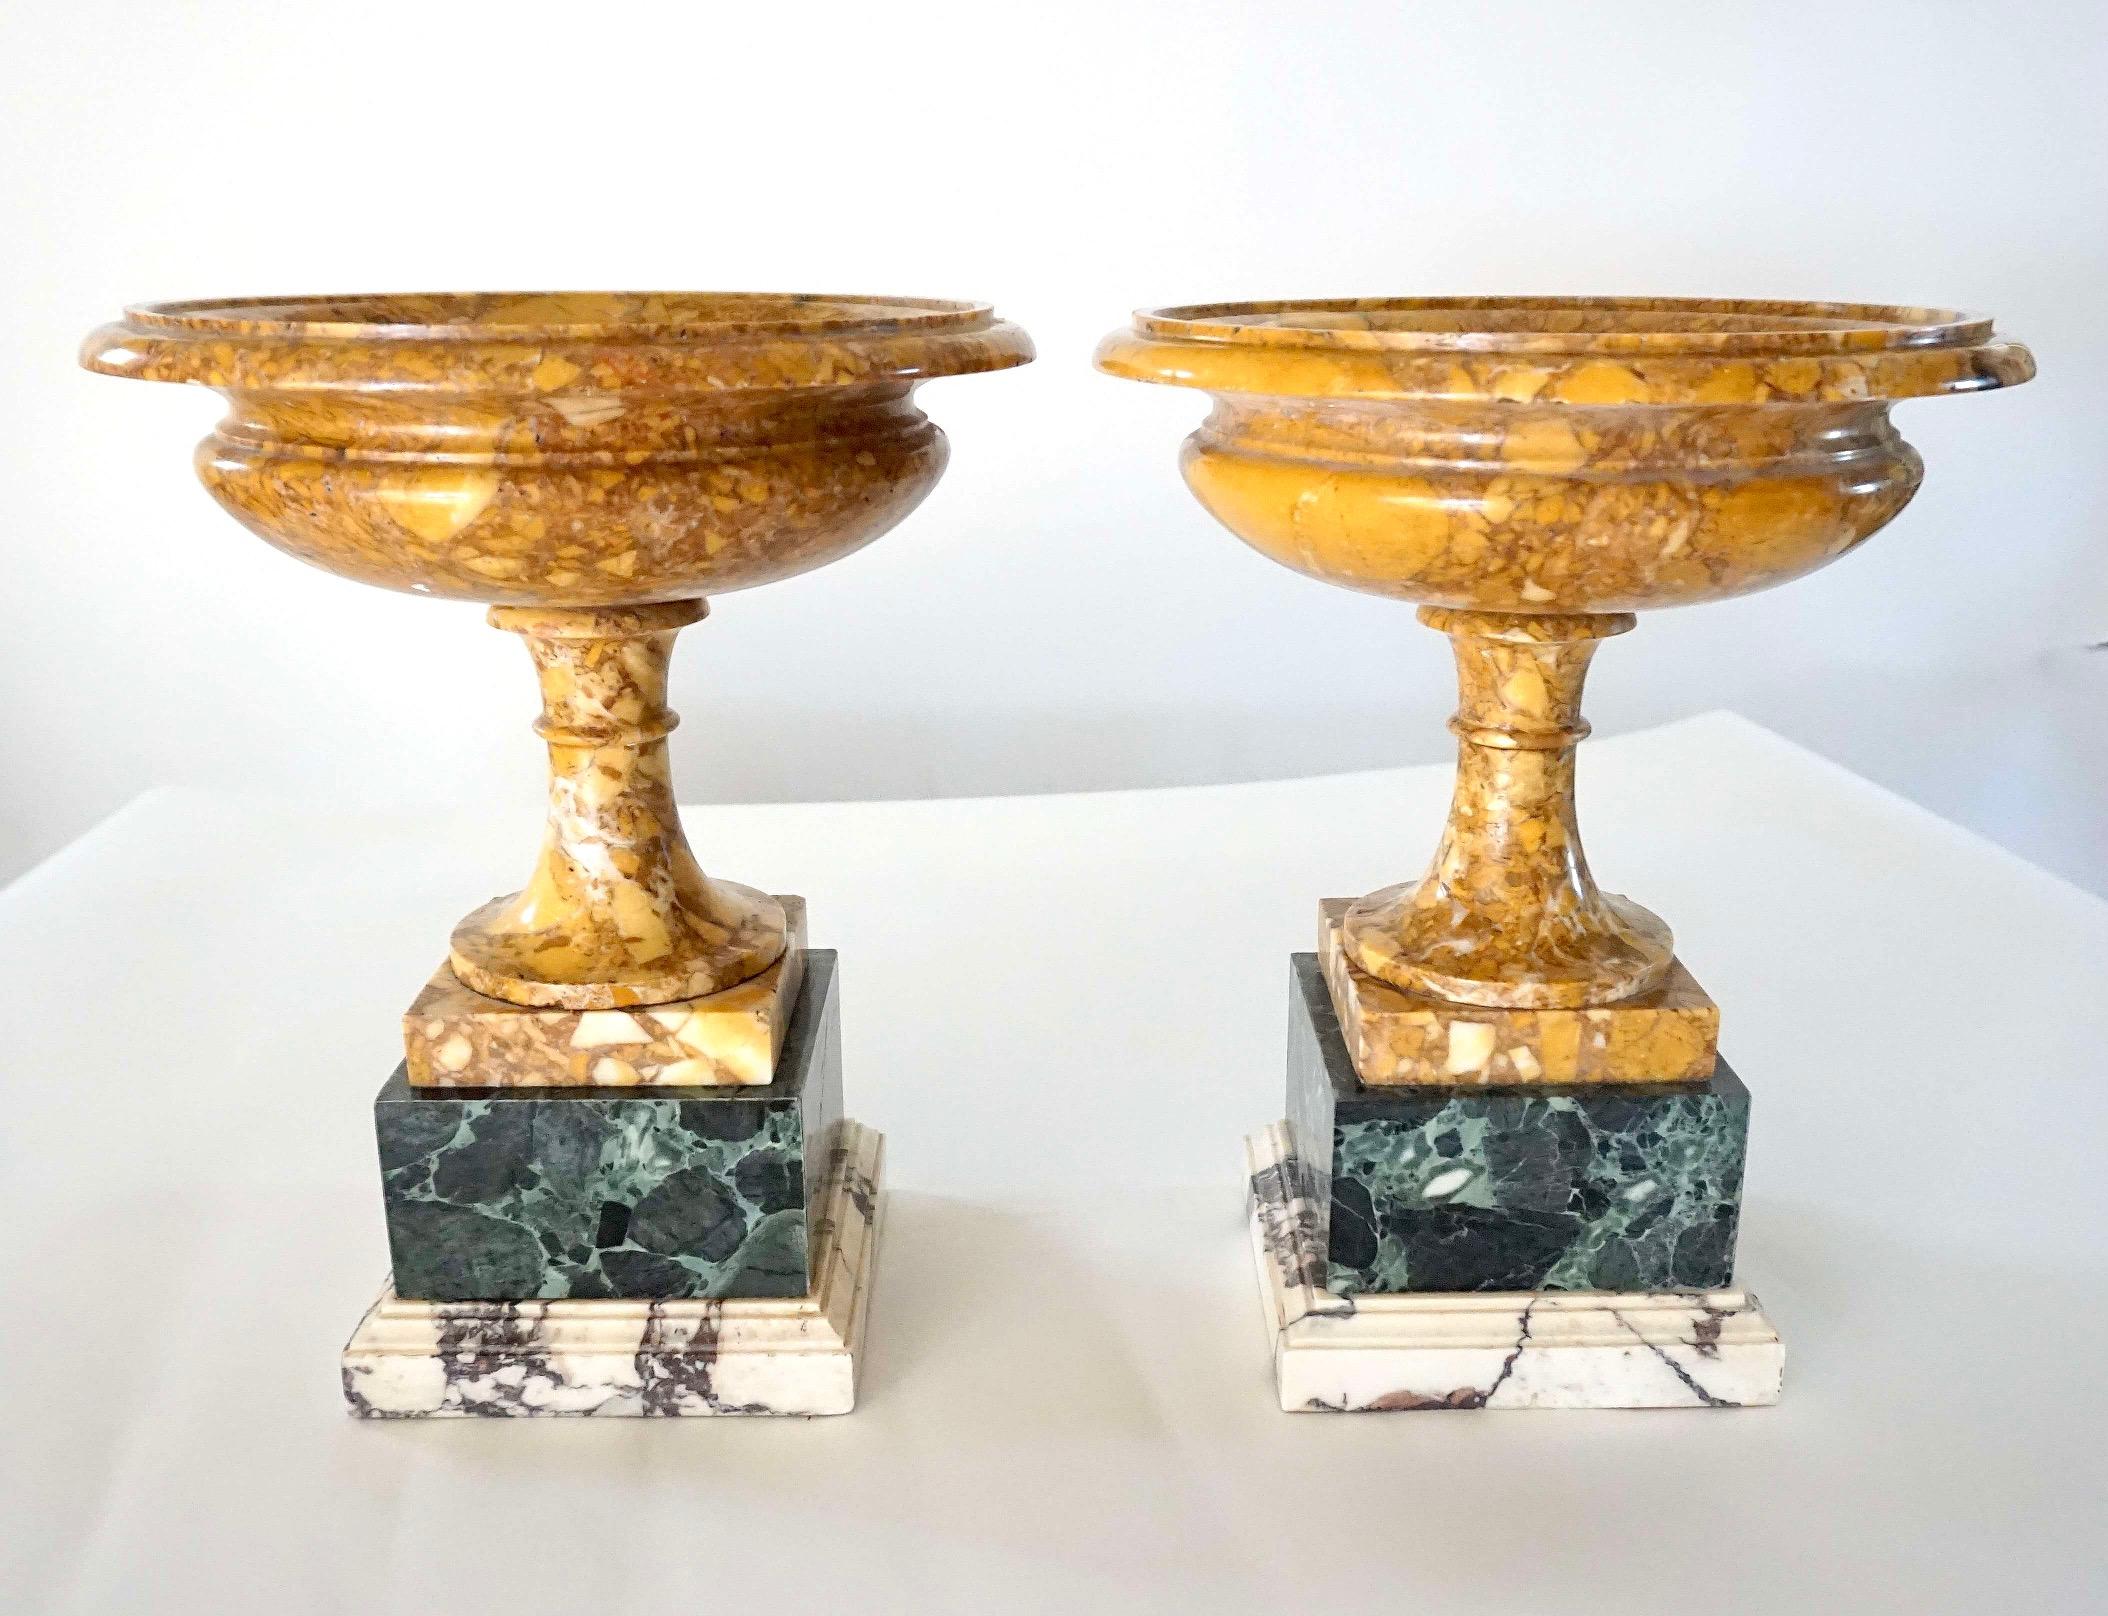 Pair of 19th Century Italian Neoclassical Tazze in Polychrome Marbles For Sale 7